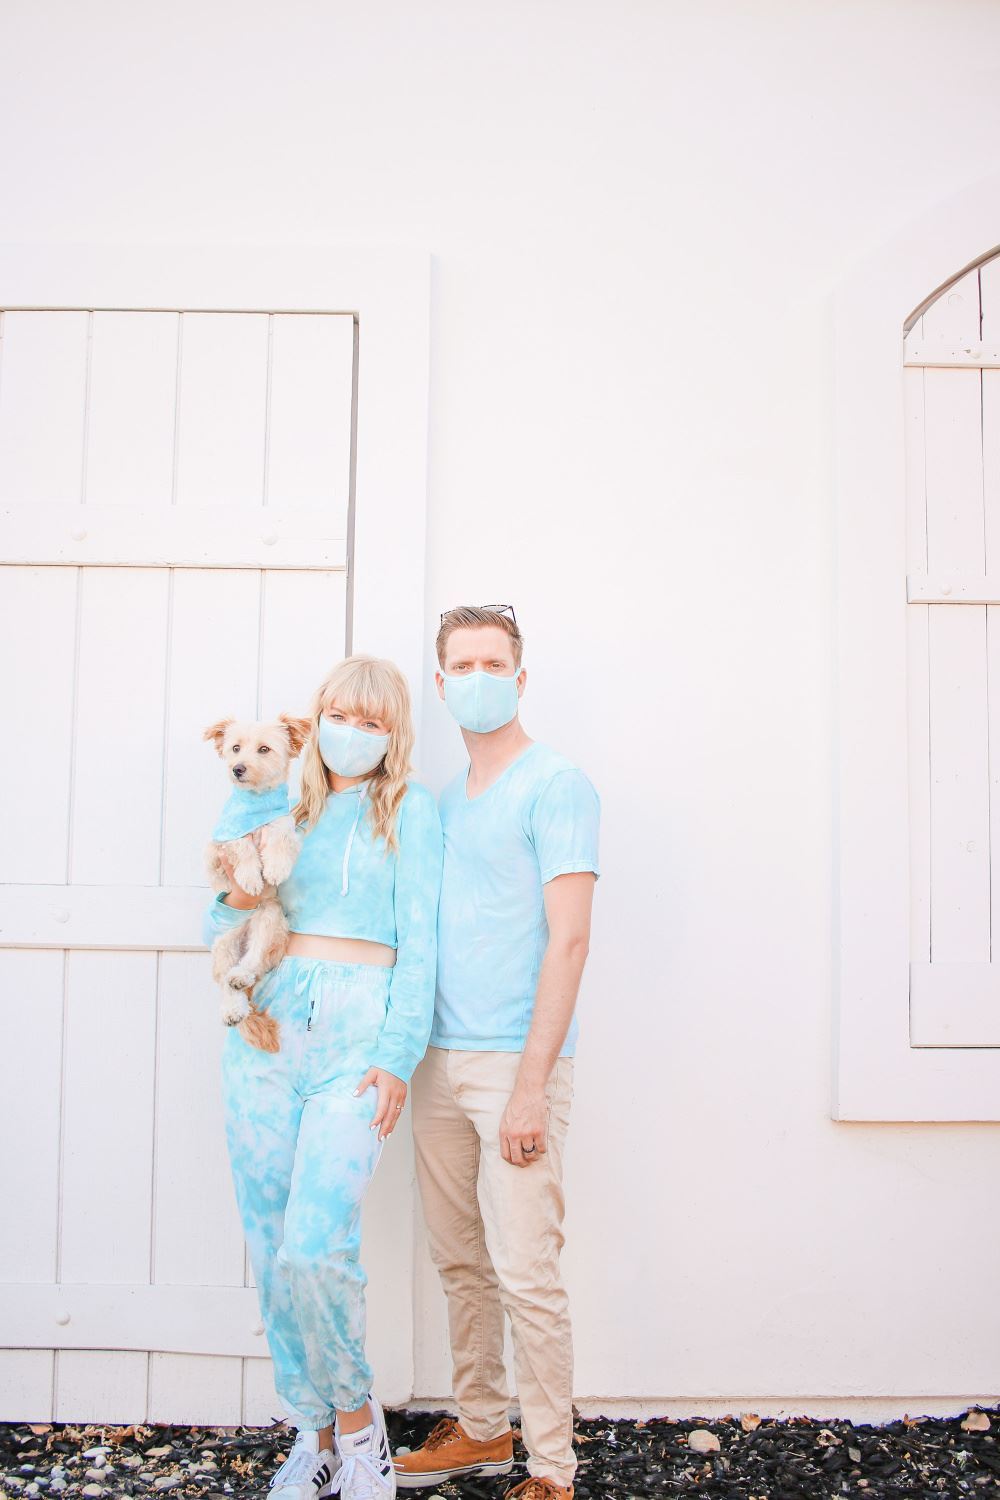 Matching tie-dye sweatsuit and face masks